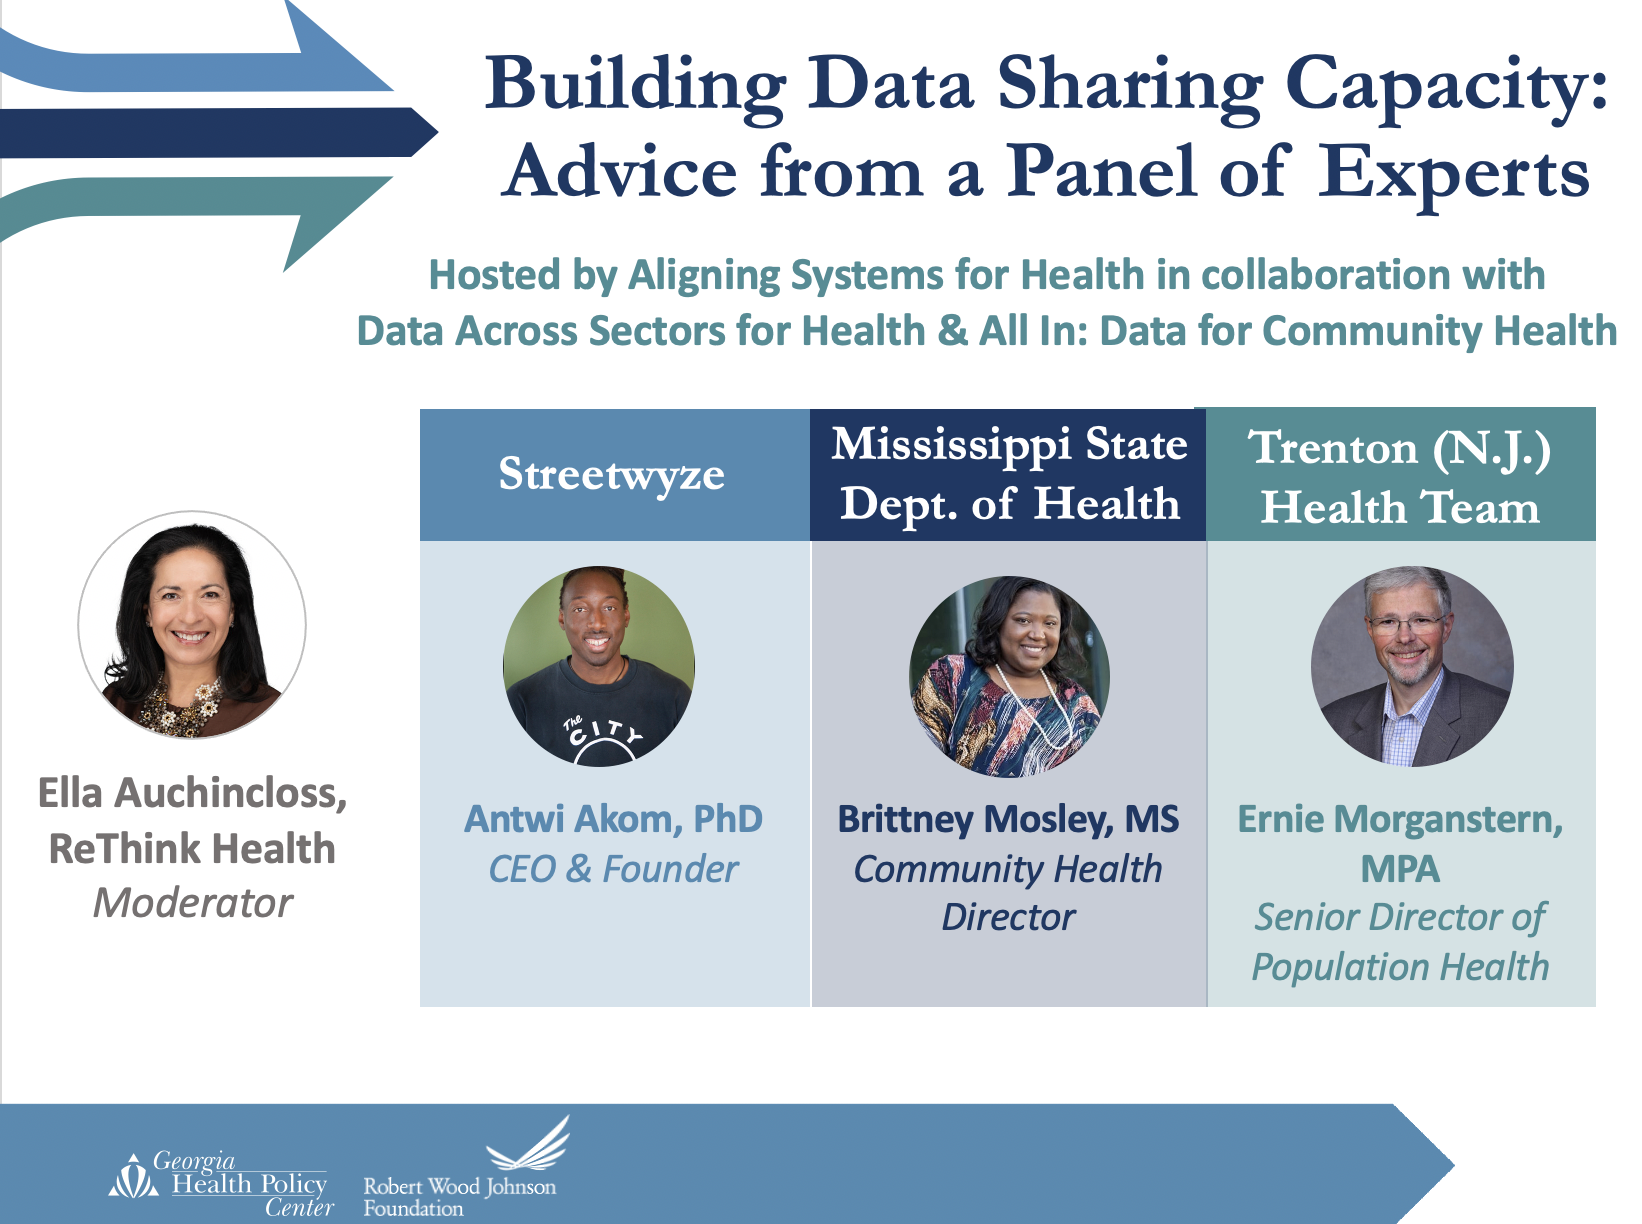 Building Data Sharing Capacity: Advice from a Panel of Experts